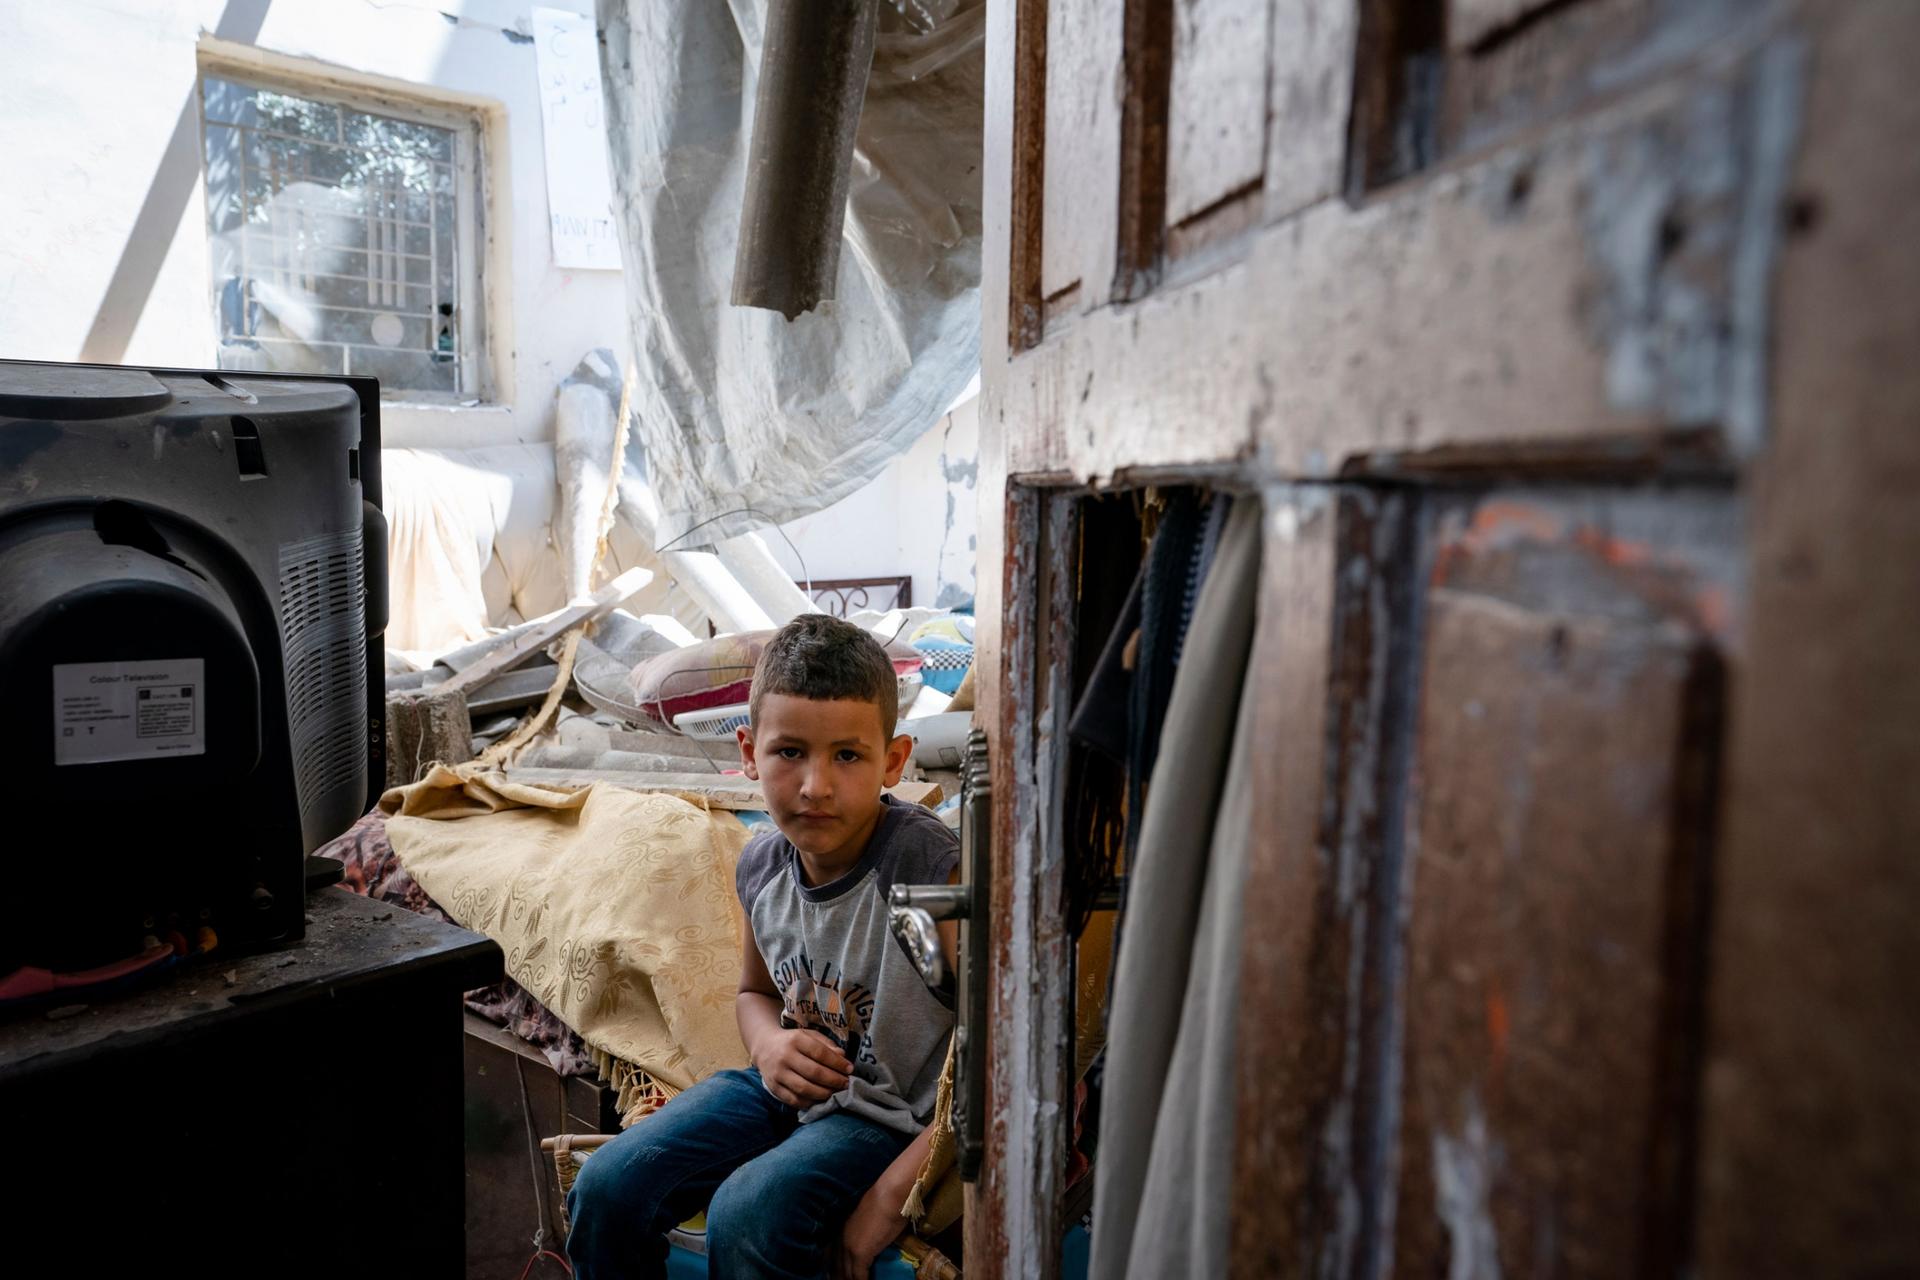 A young boy is shown seated next to a television and a damaged door in the near ground.